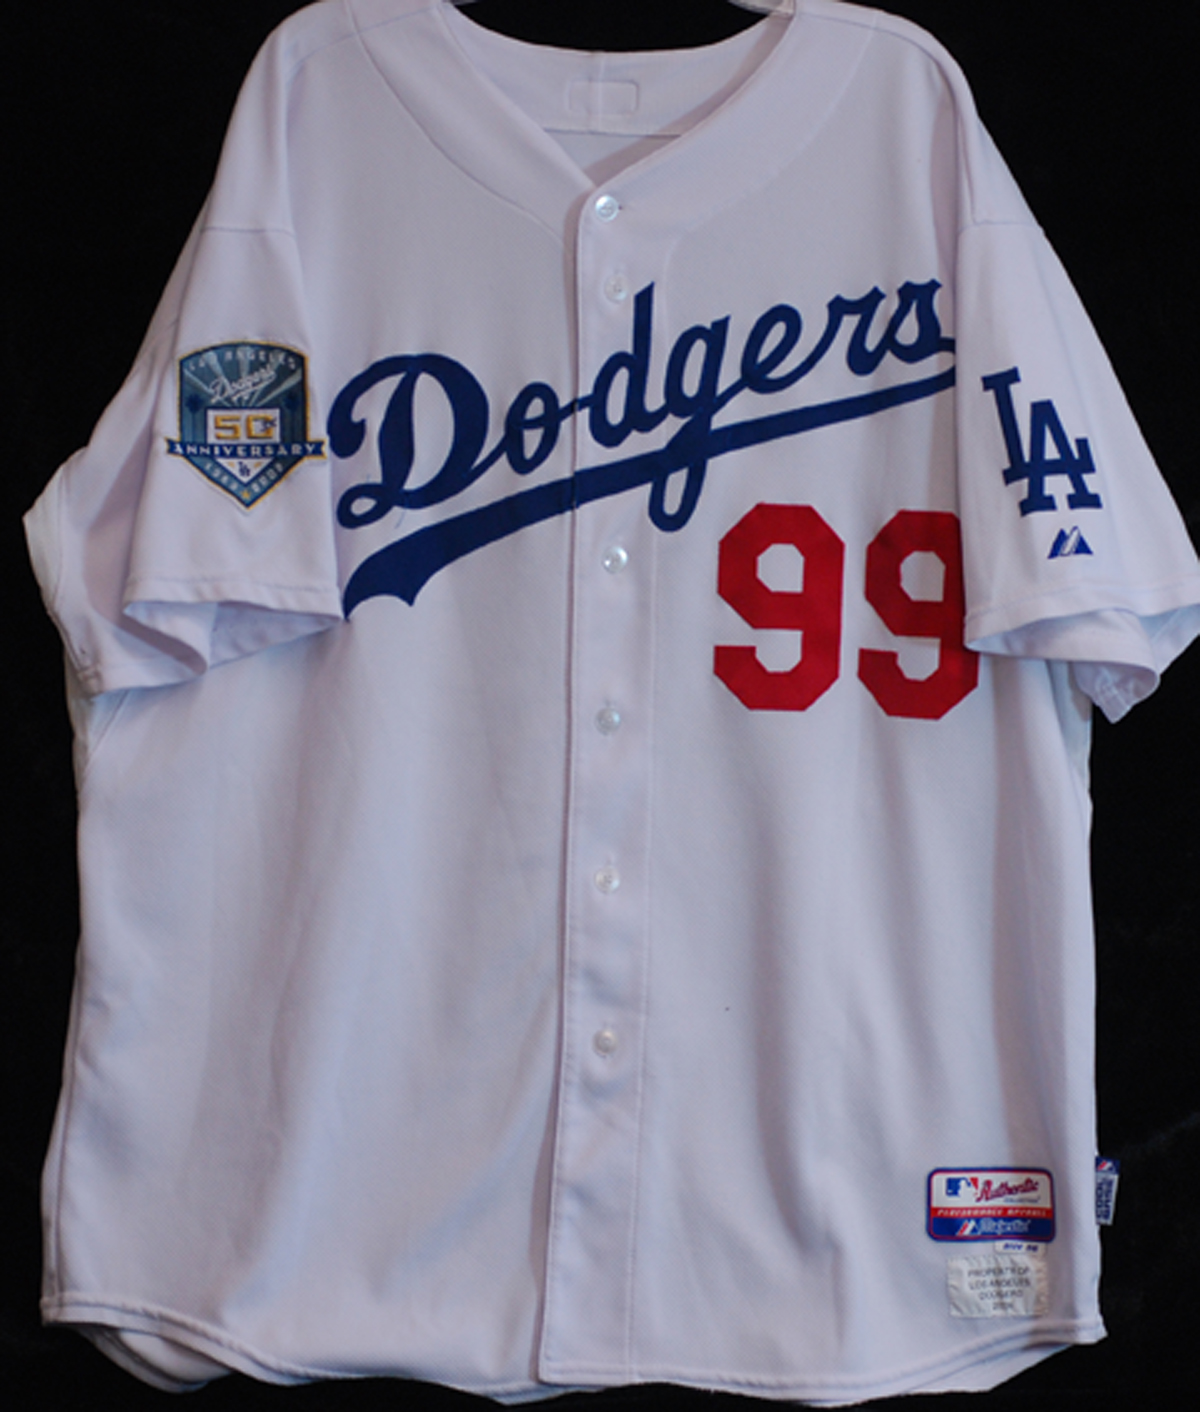 dodgers game used jersey